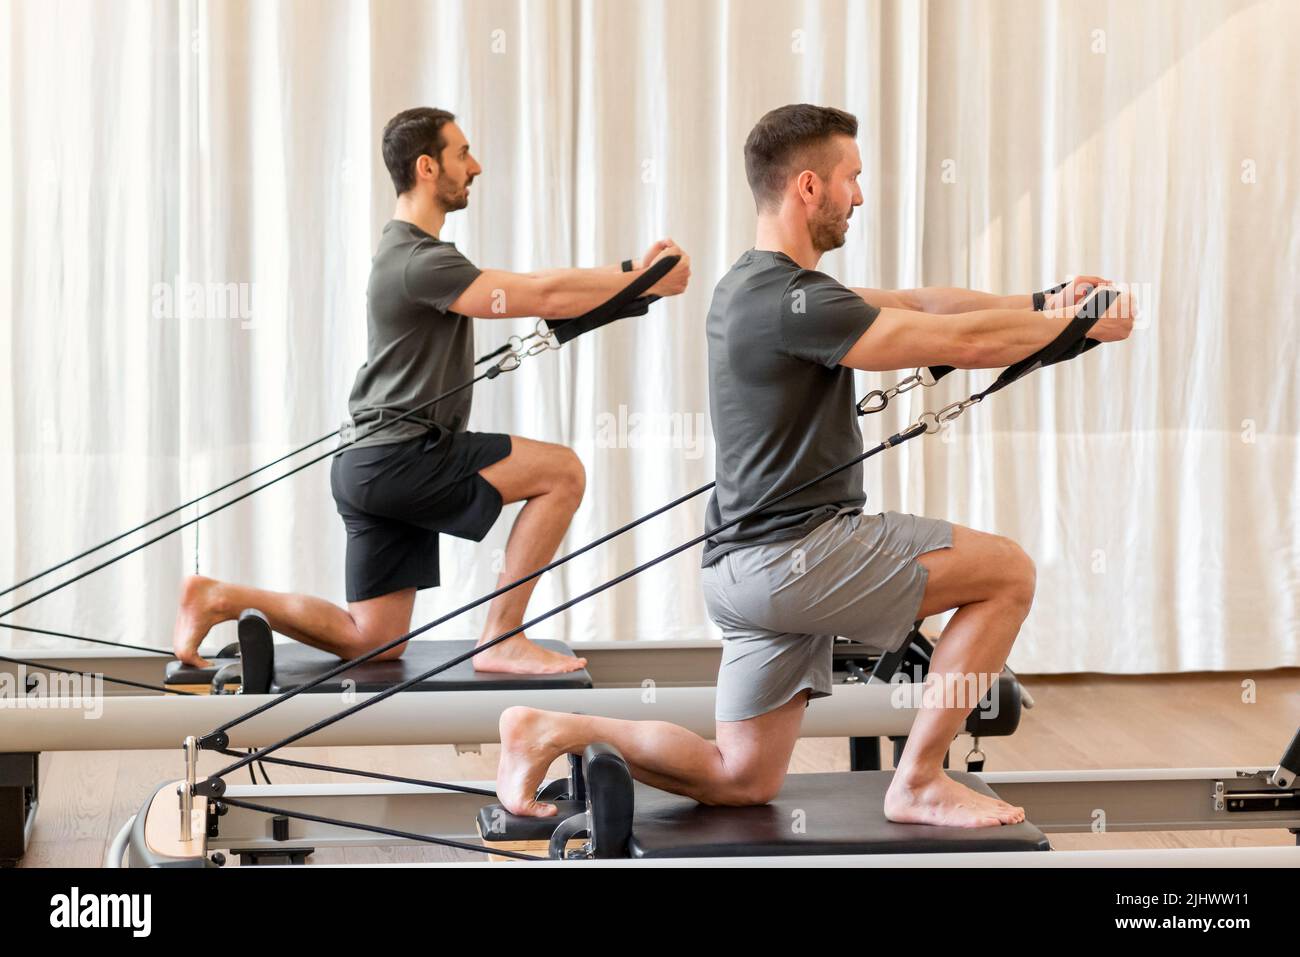 Full body side view of strong men in sportswear doing hug tree kneeling pilates exercise with resistance bands on reformer bed during training in gym Stock Photo